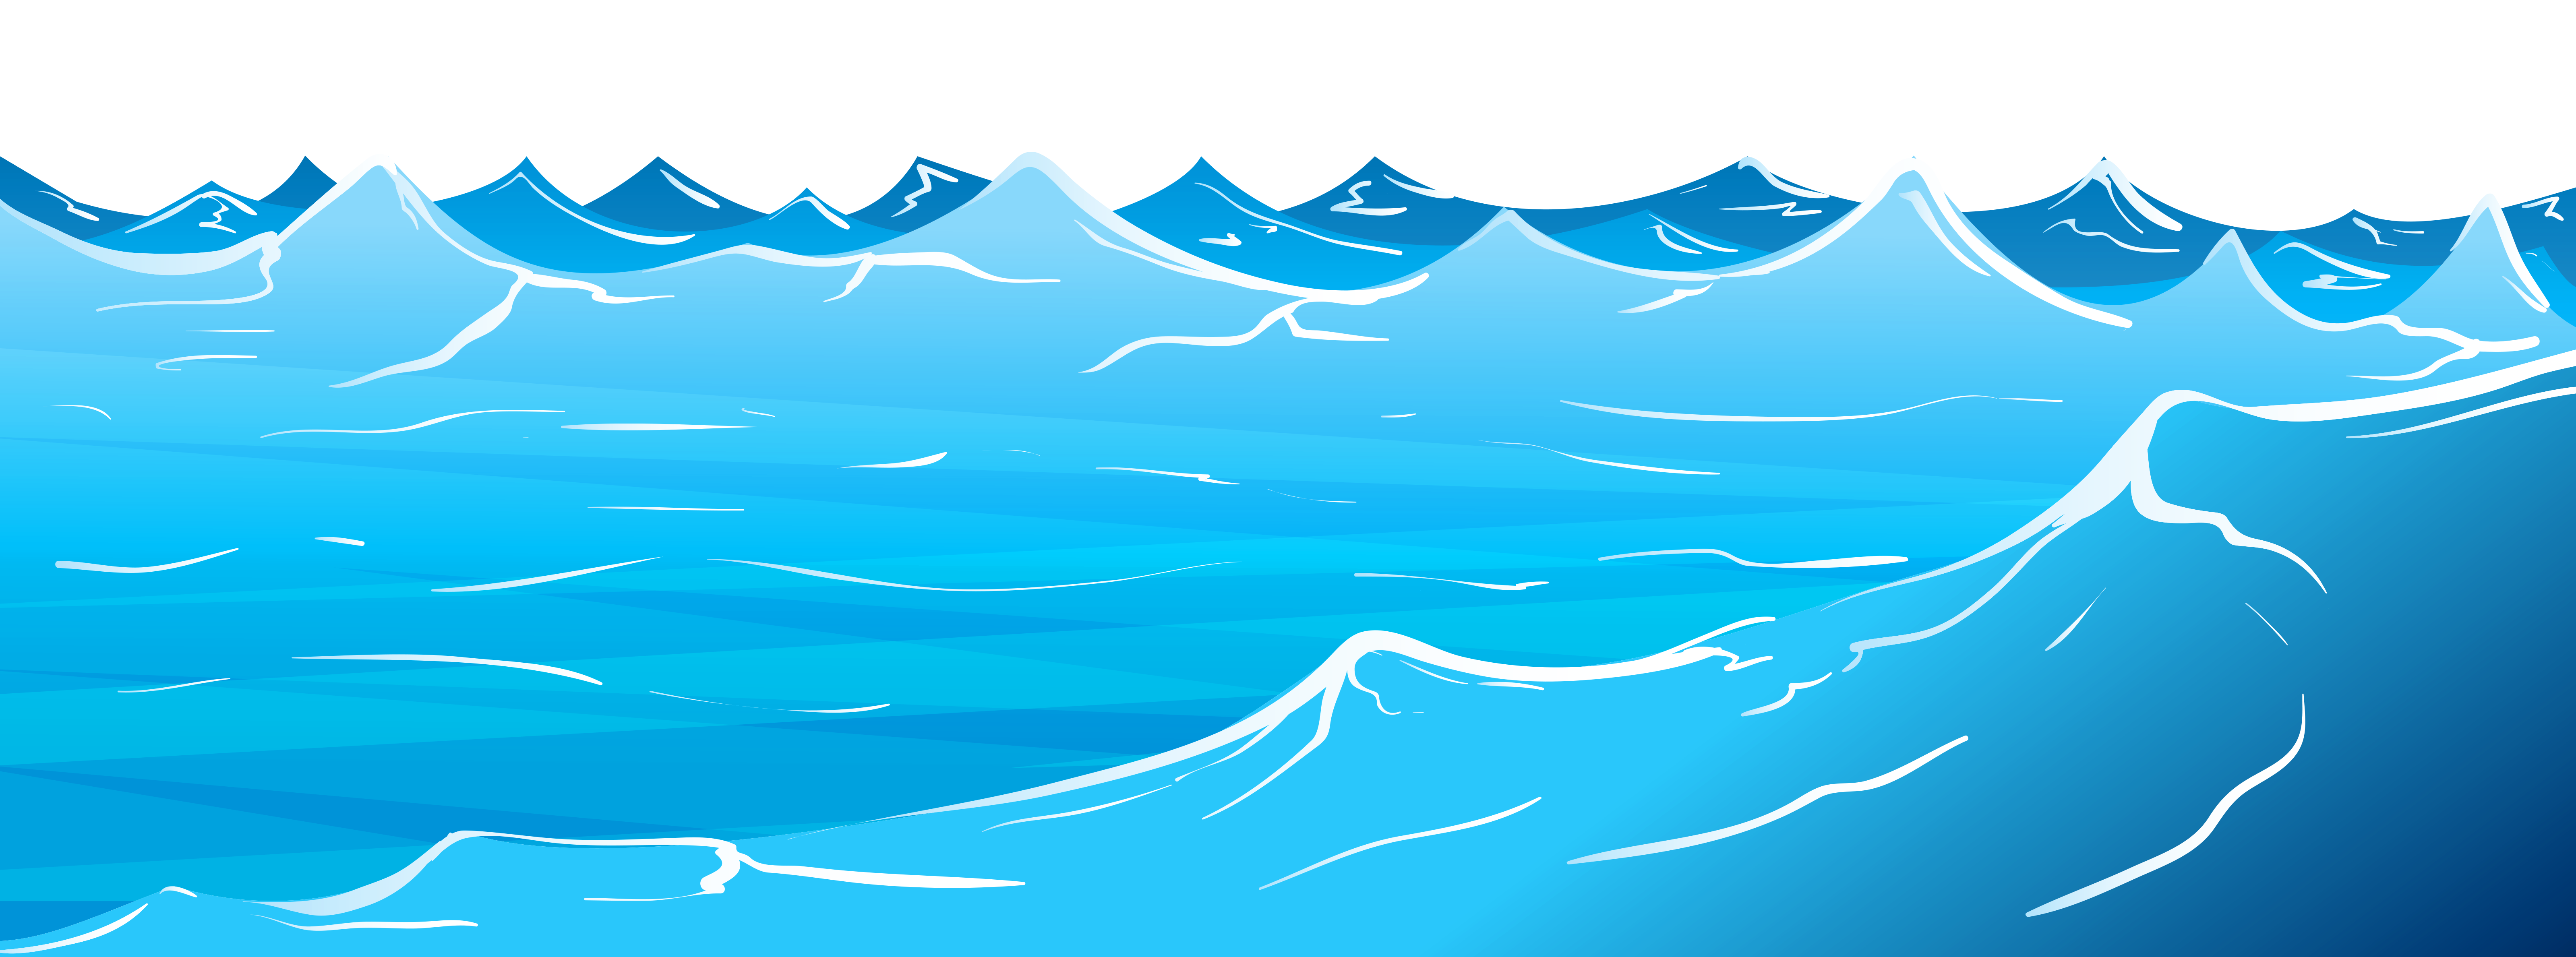 Volleyball clipart water. What is in ocean